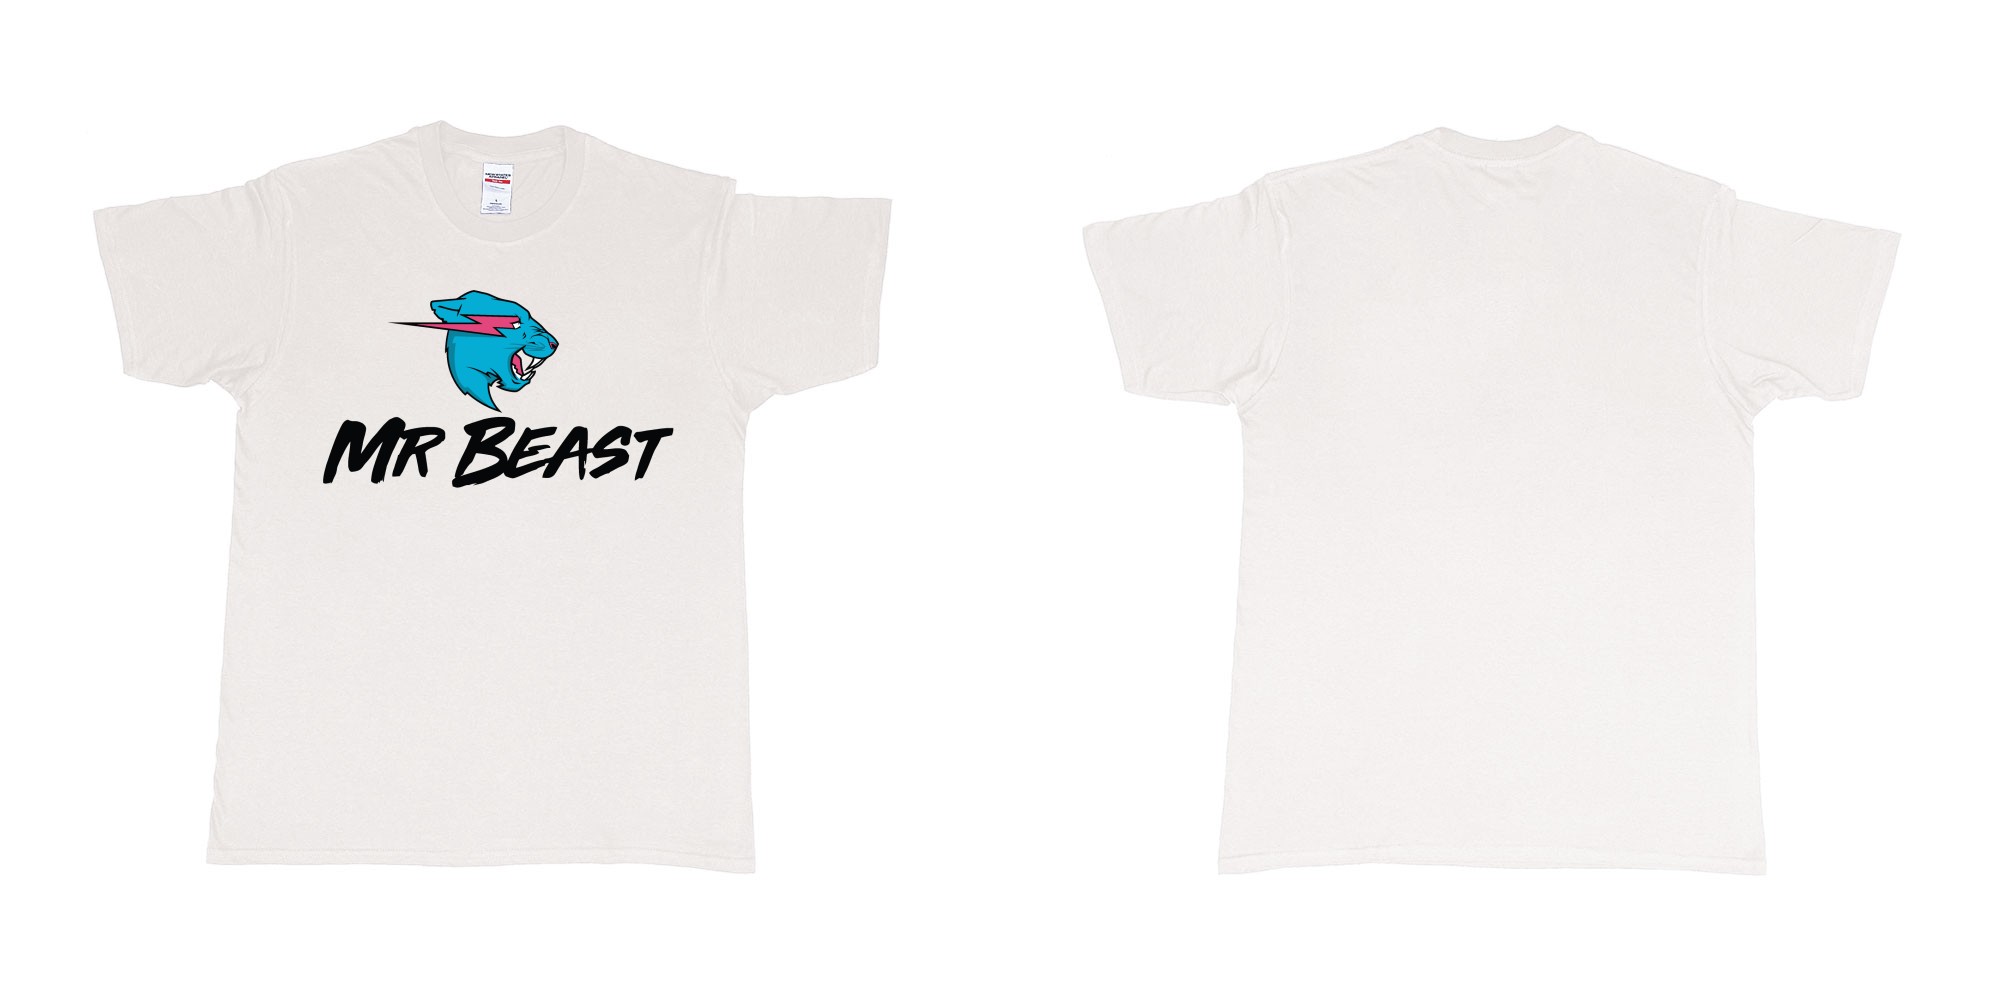 Custom tshirt design mr beast logo in fabric color white choice your own text made in Bali by The Pirate Way